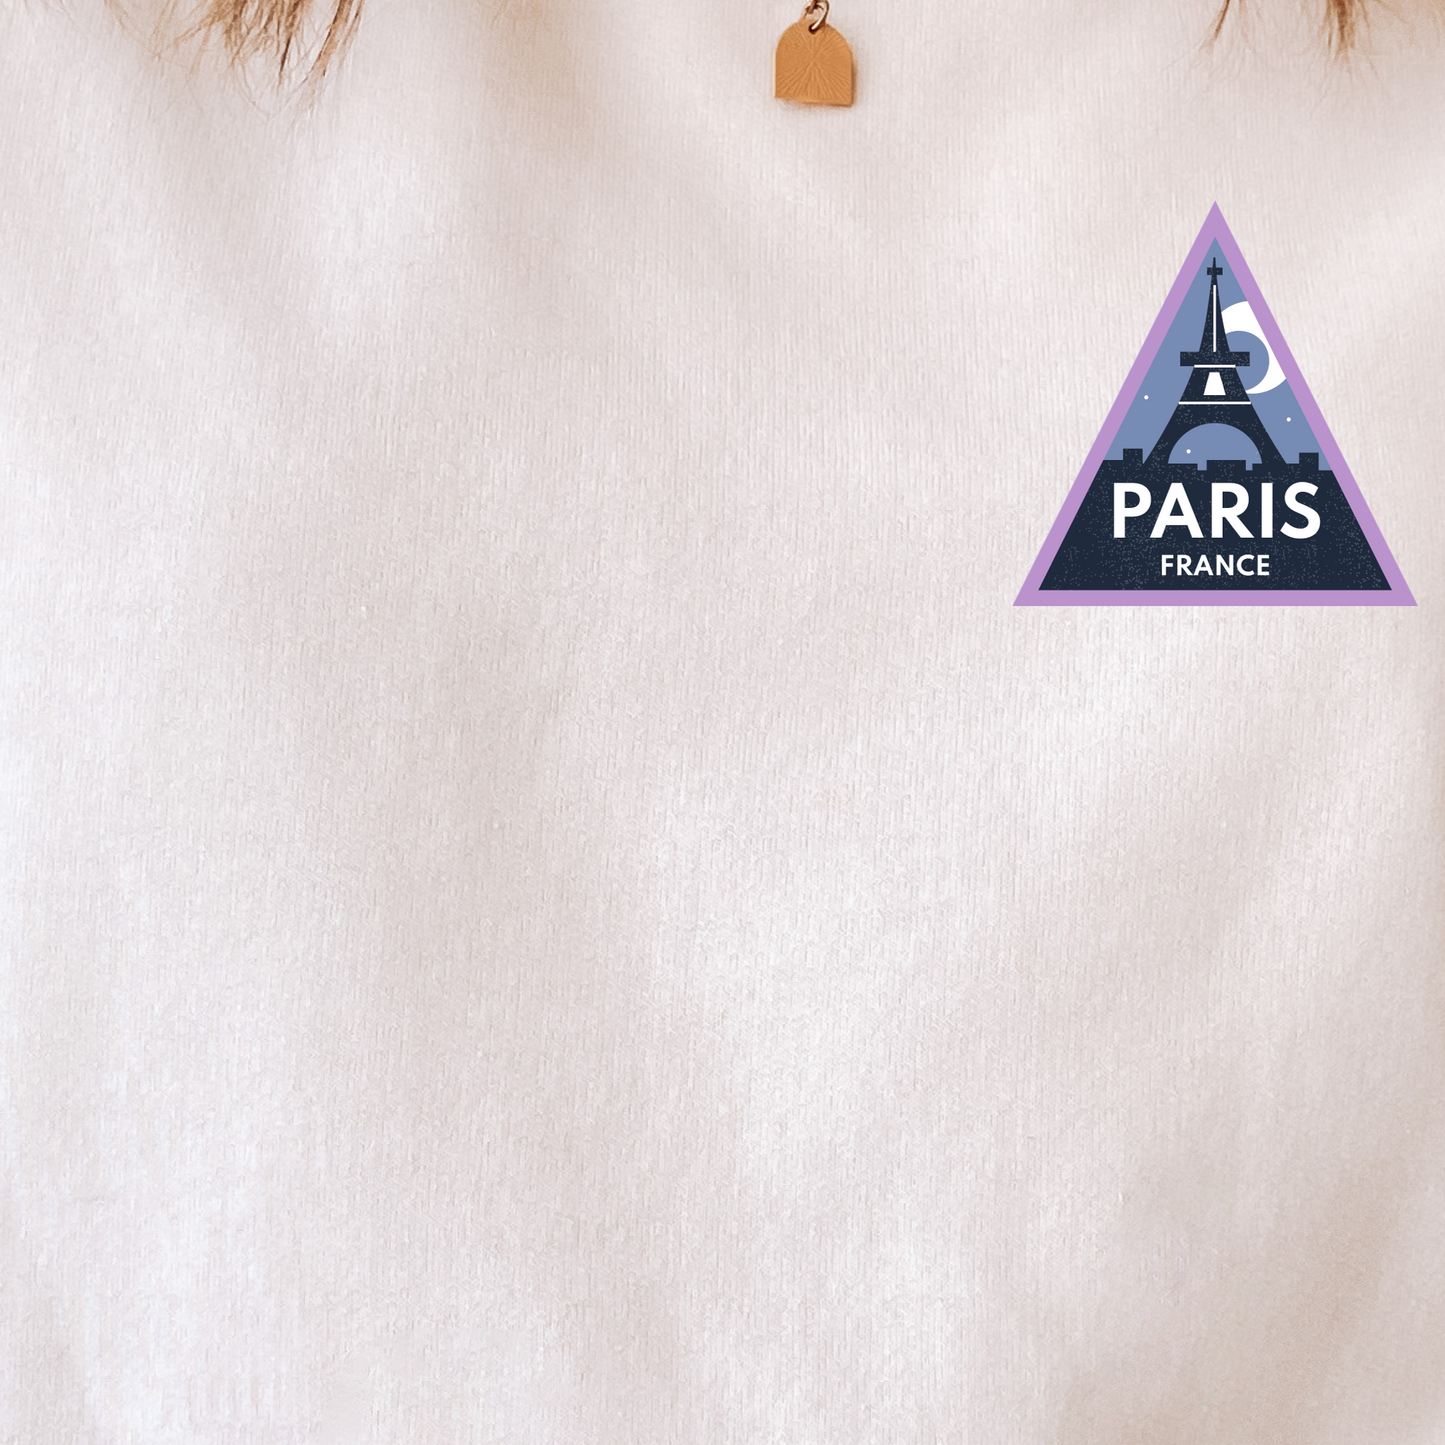 (Shirt not included) PARIS triangle POCKET -  Matte Clear Film Transfer